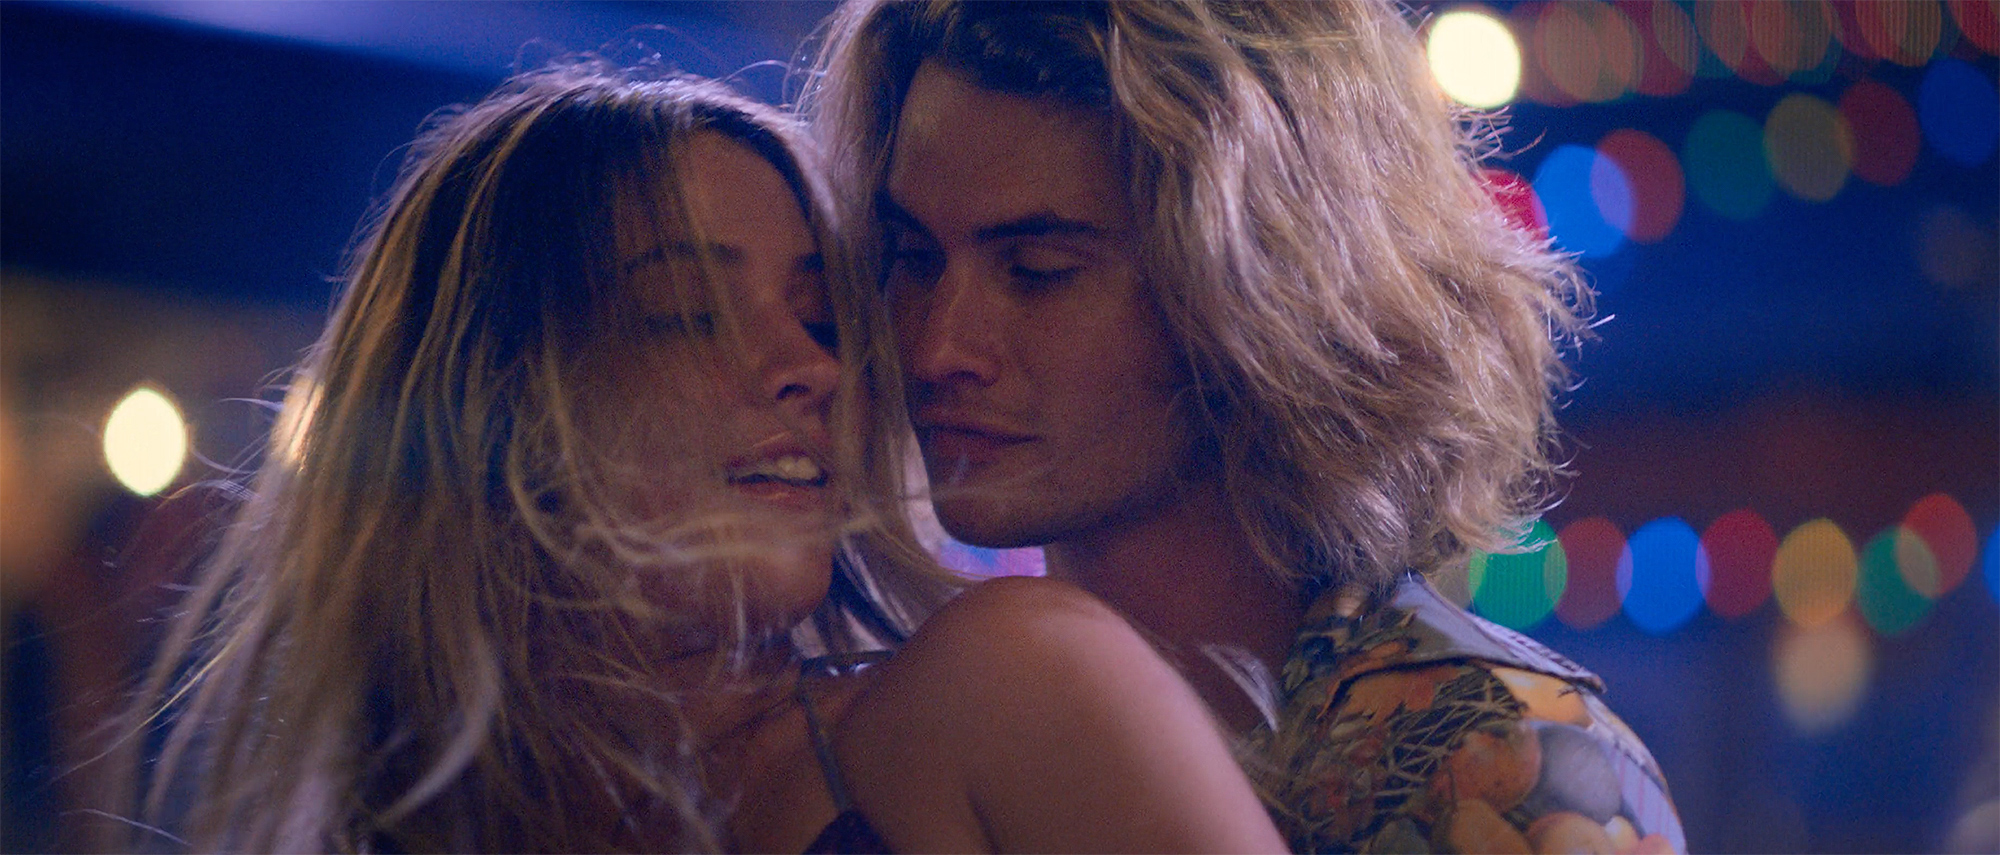 Chase Stokes, Madelyn Cline Make Out in Kygos Hot Stuff Video